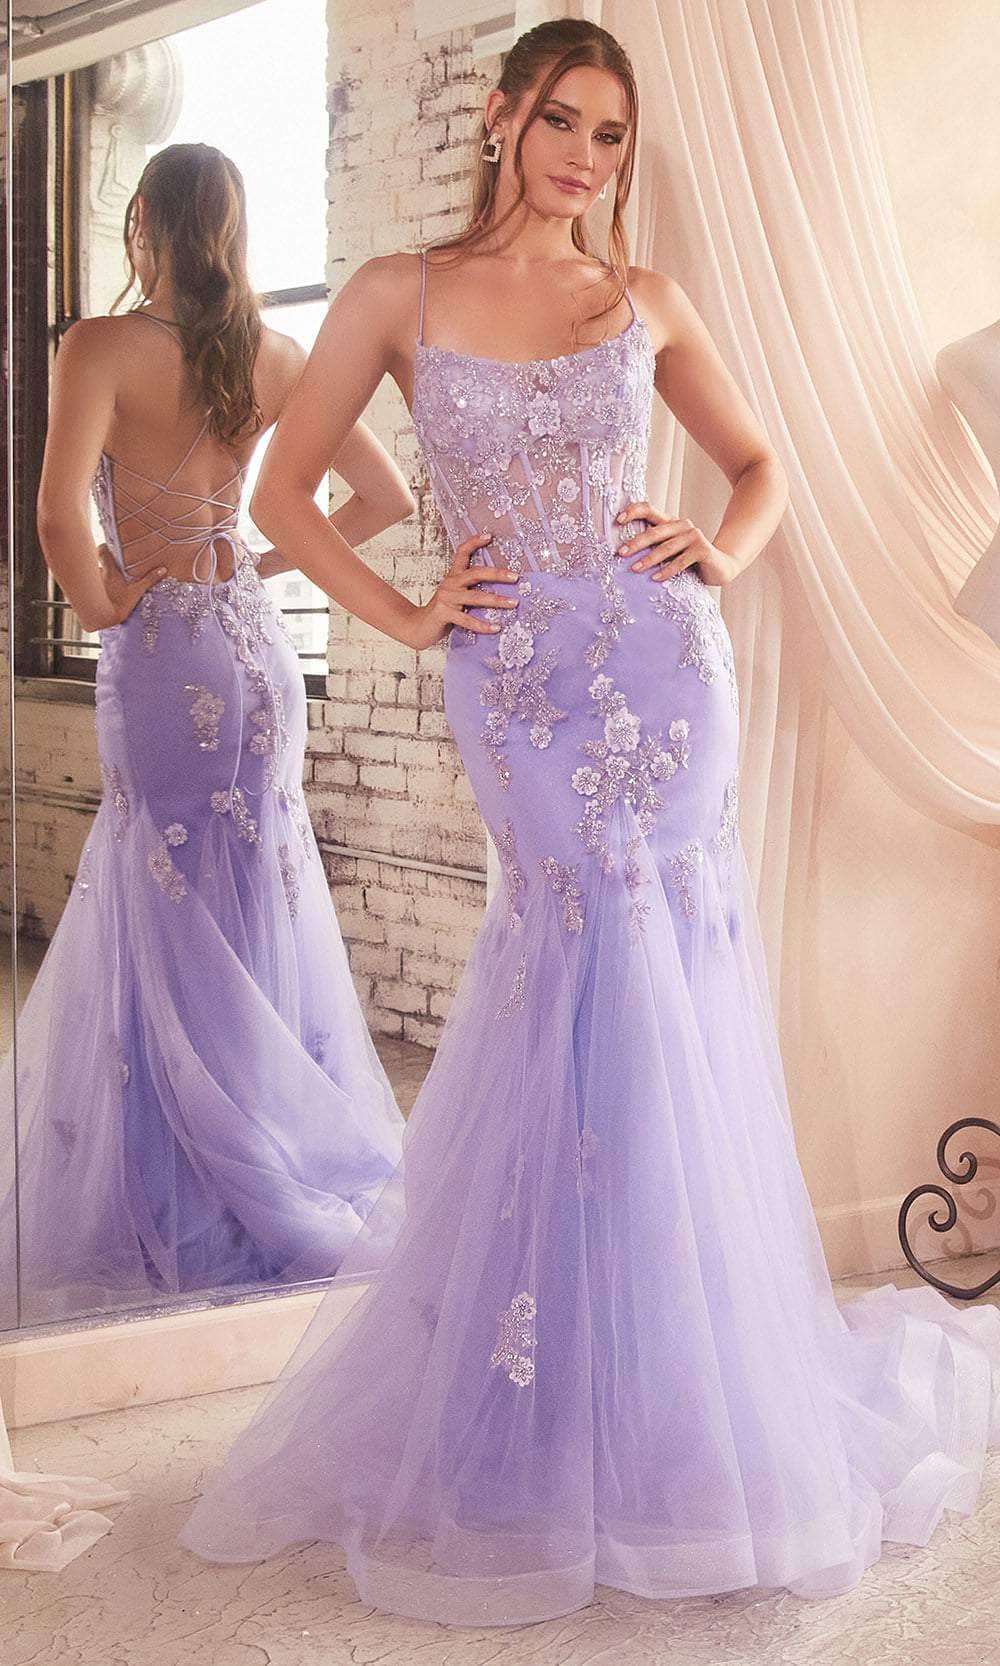 Ladivine D145 - Lace-Up Back Beaded Prom Gown Prom Dresses